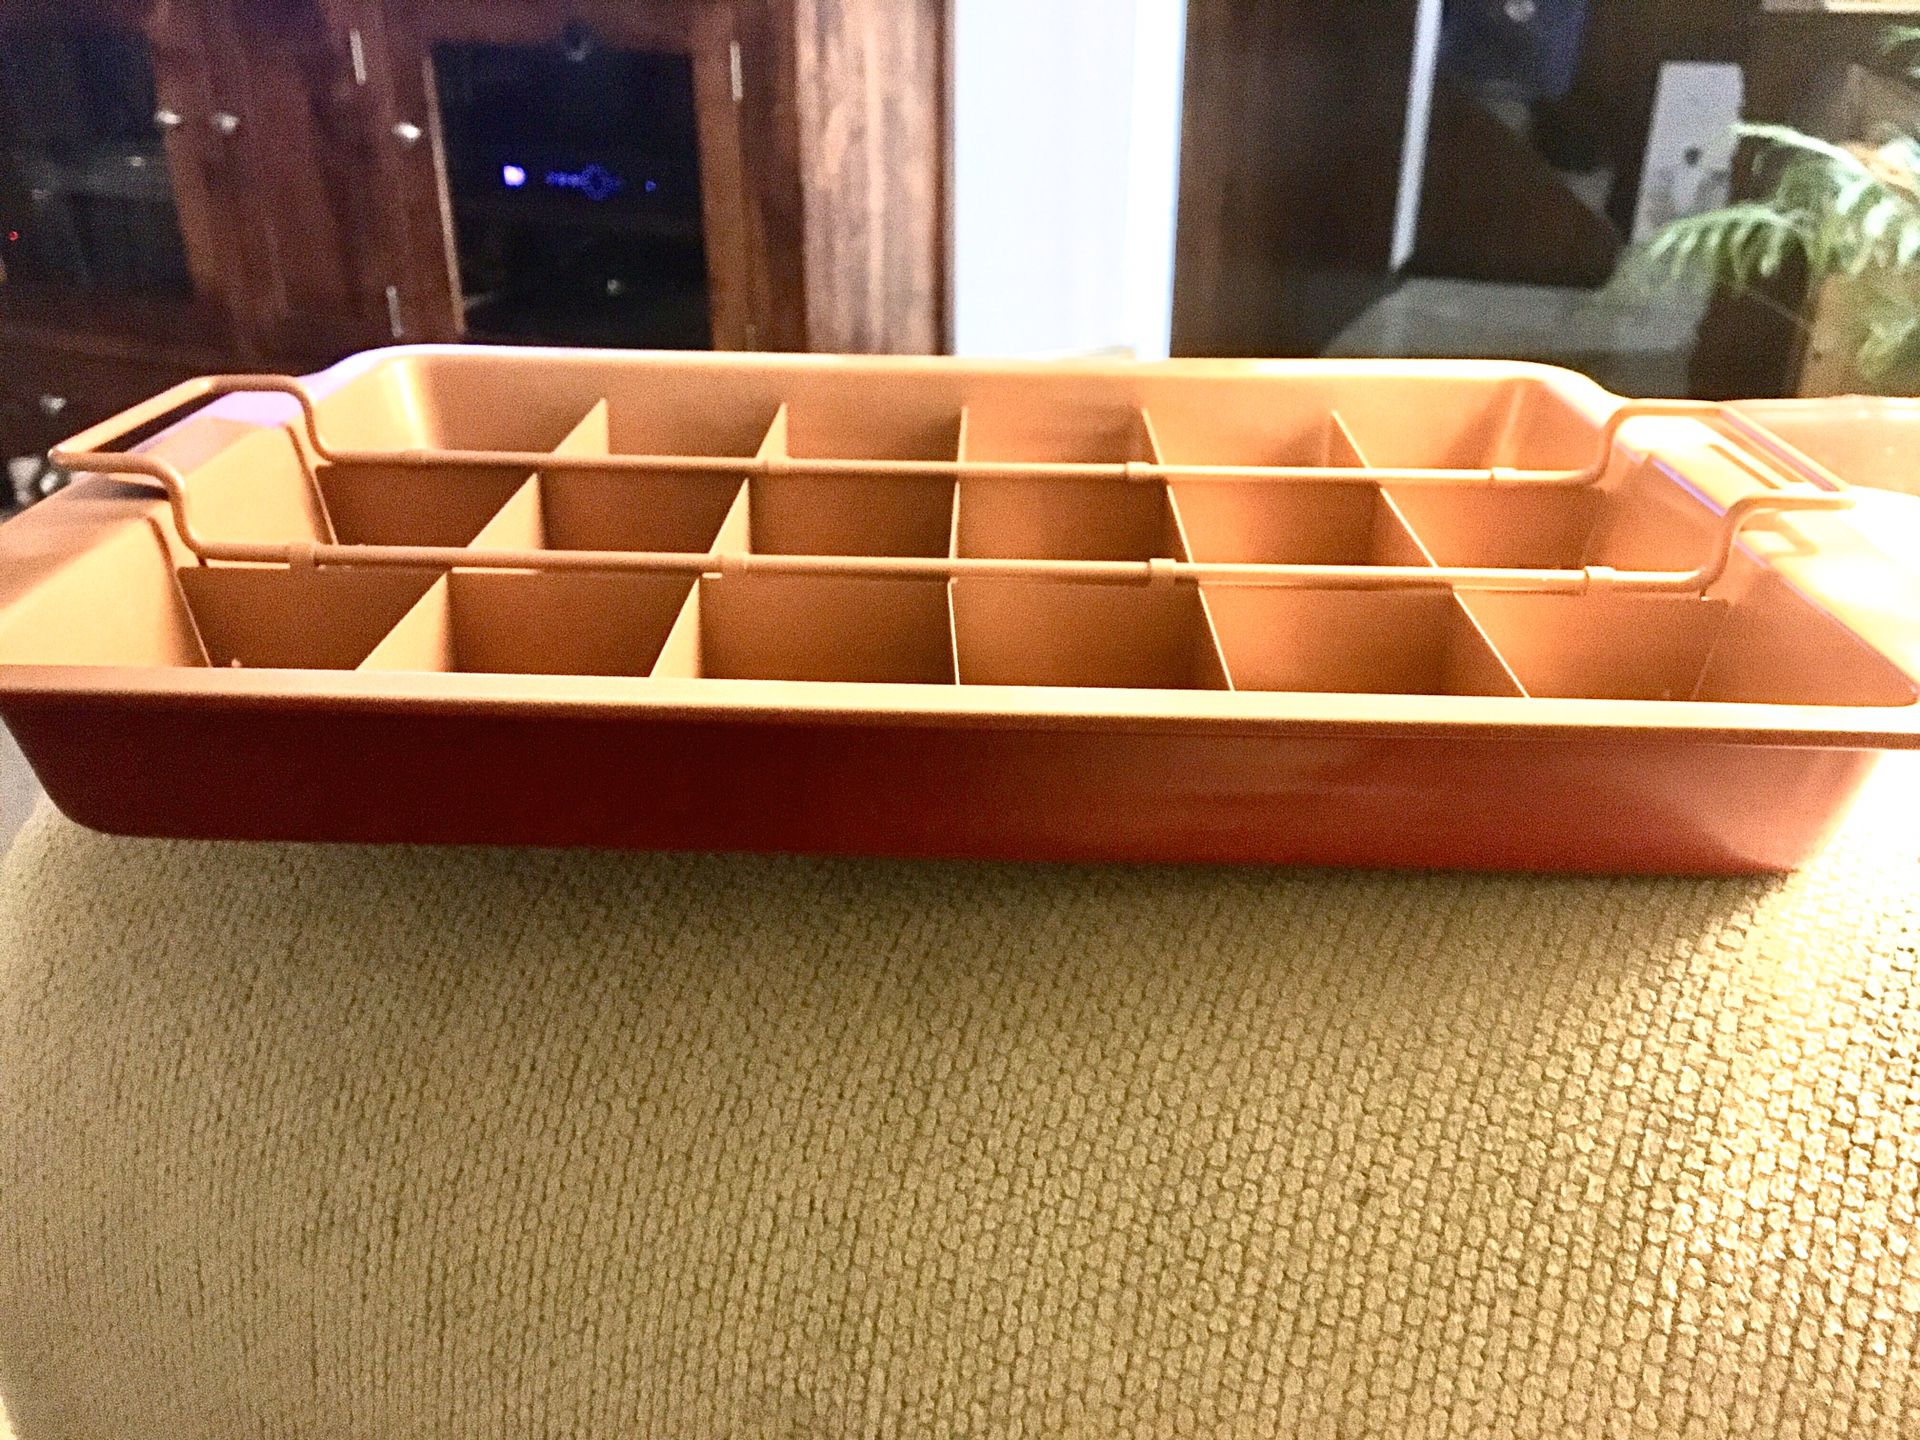 Red Copper Perfect Brownie Pan